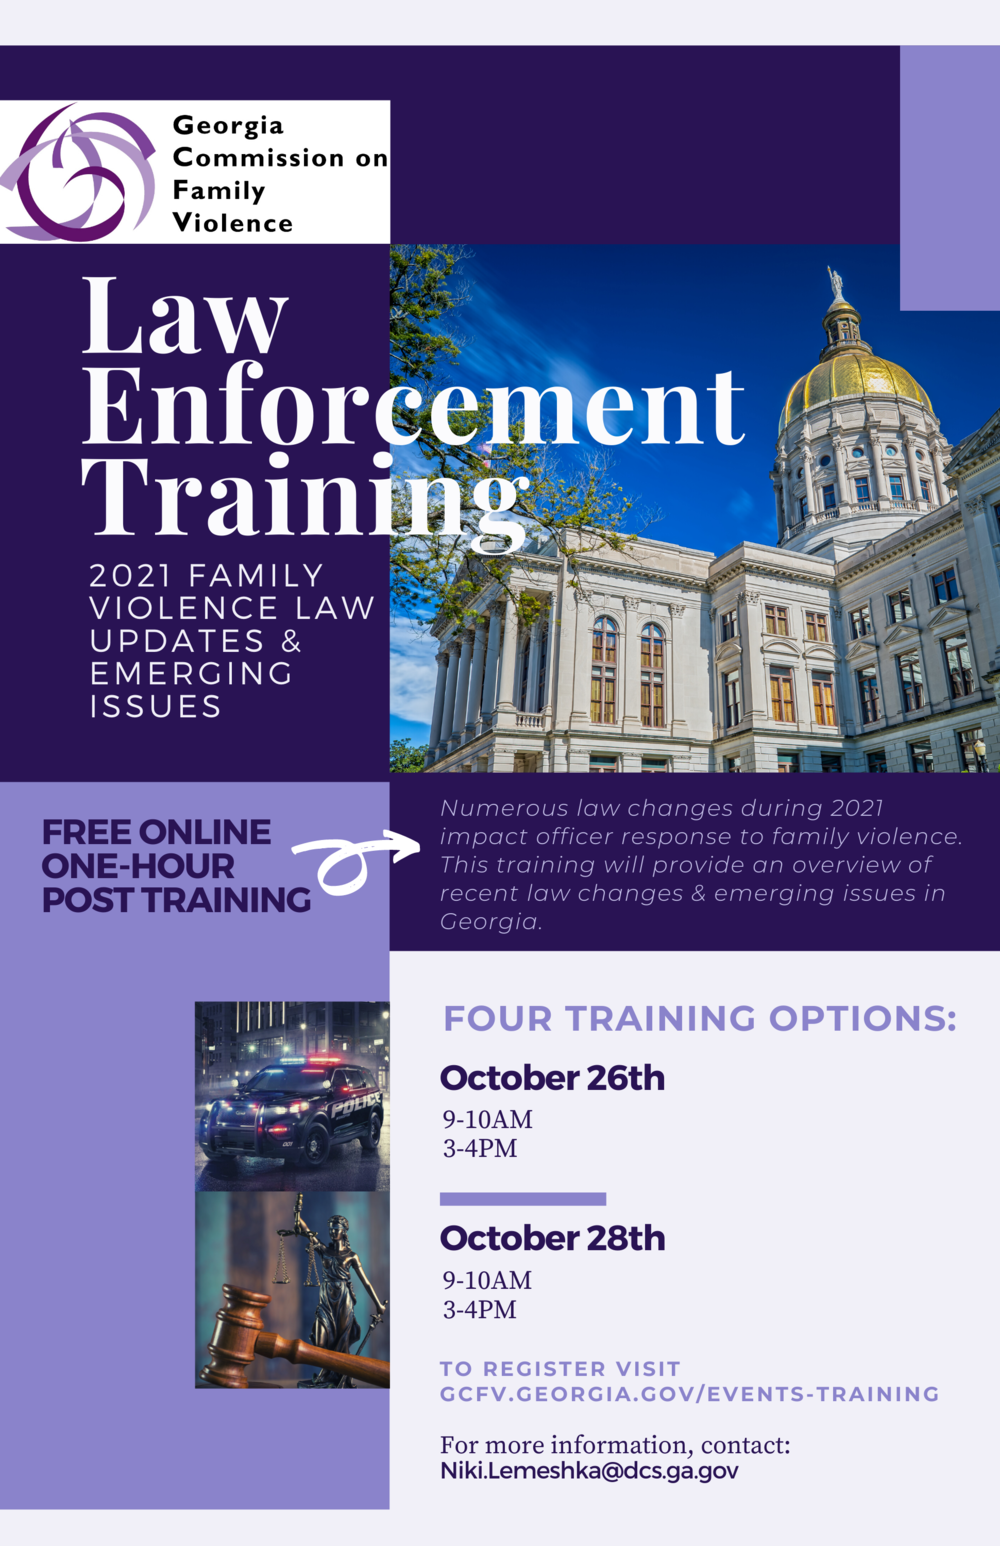 Image is of training flier, purple blocks surround photos of Georgia Capitol building, a police car, and the scales of justice